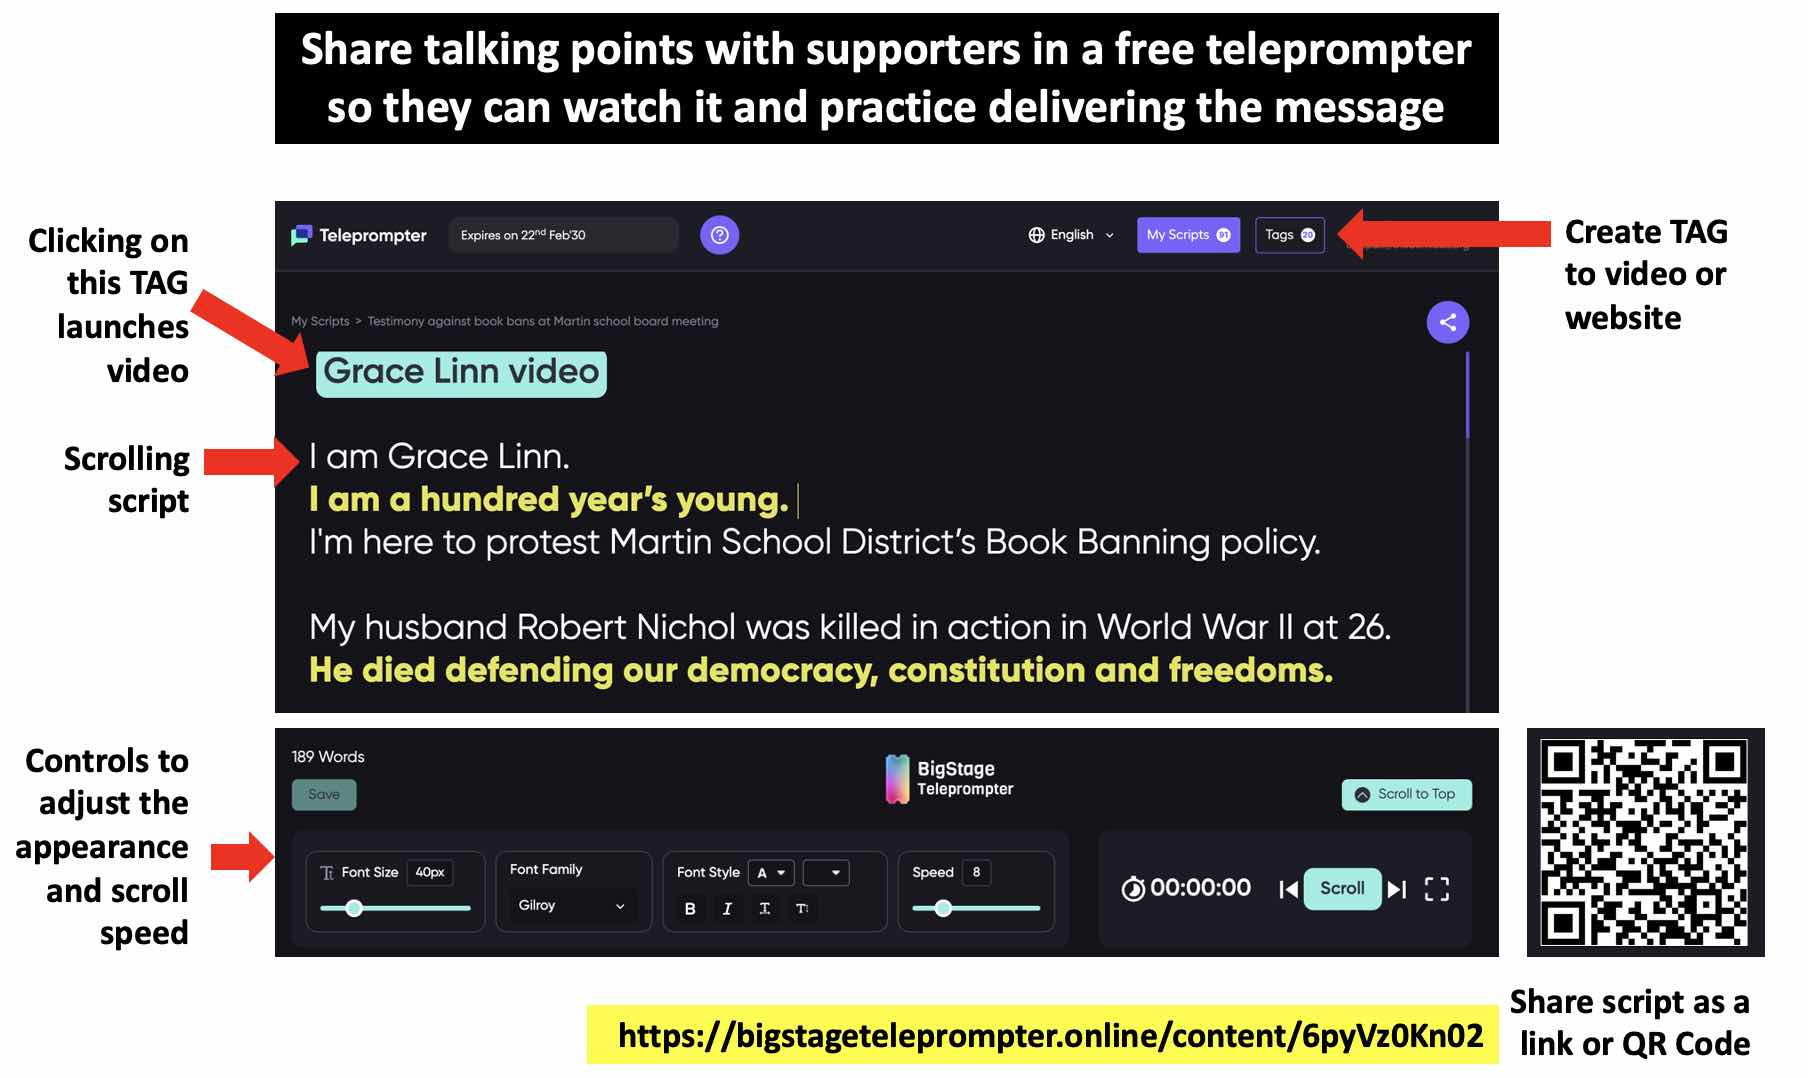 Use the free BigStage Teleprompter to share talking points with supporters so they can amplify your message.